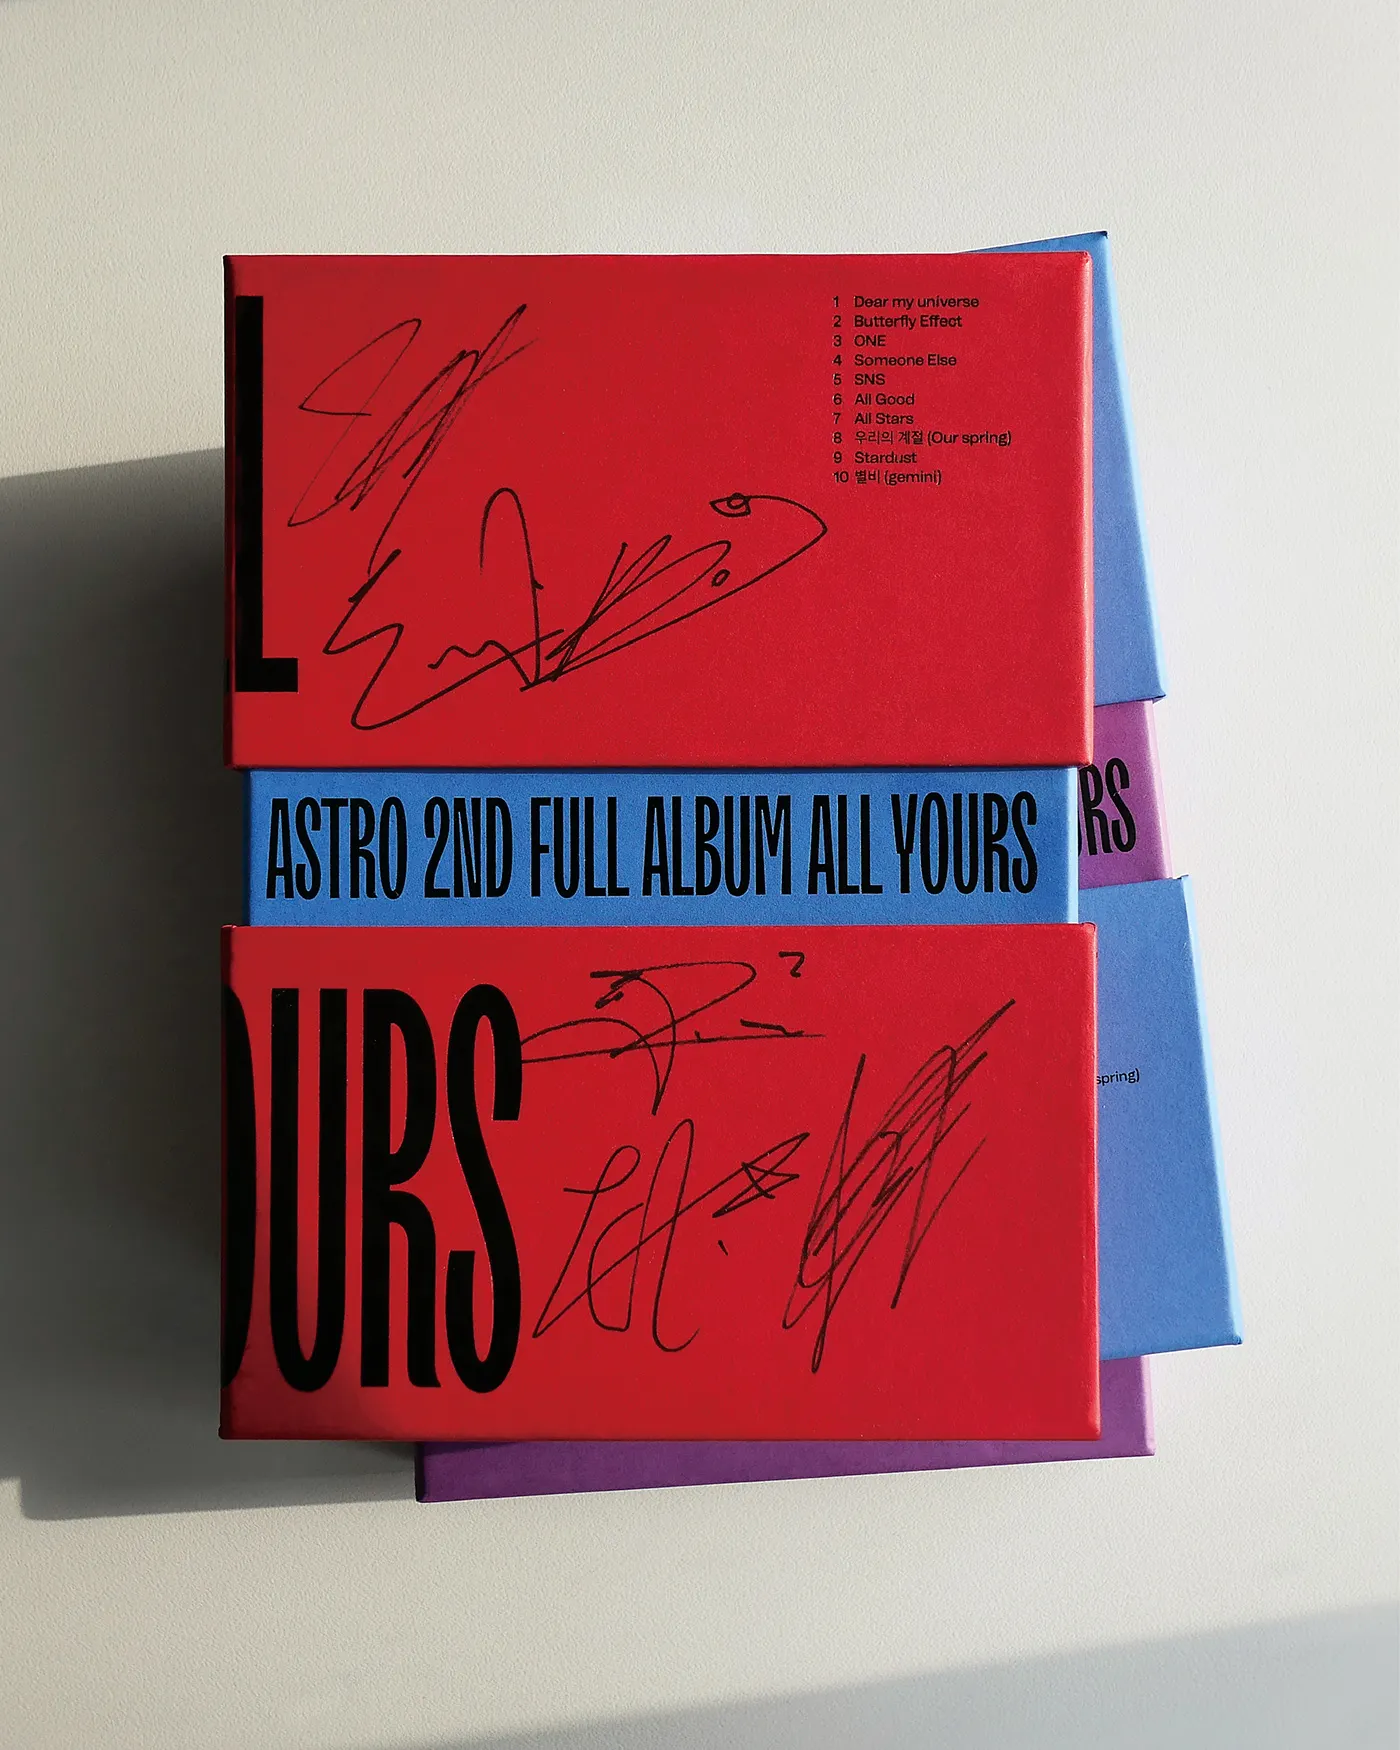 ASTRO AUTOGRAPHED SIGNED 2ND FULL ALBUM 'ALL YOURS' CD K-POP ALL